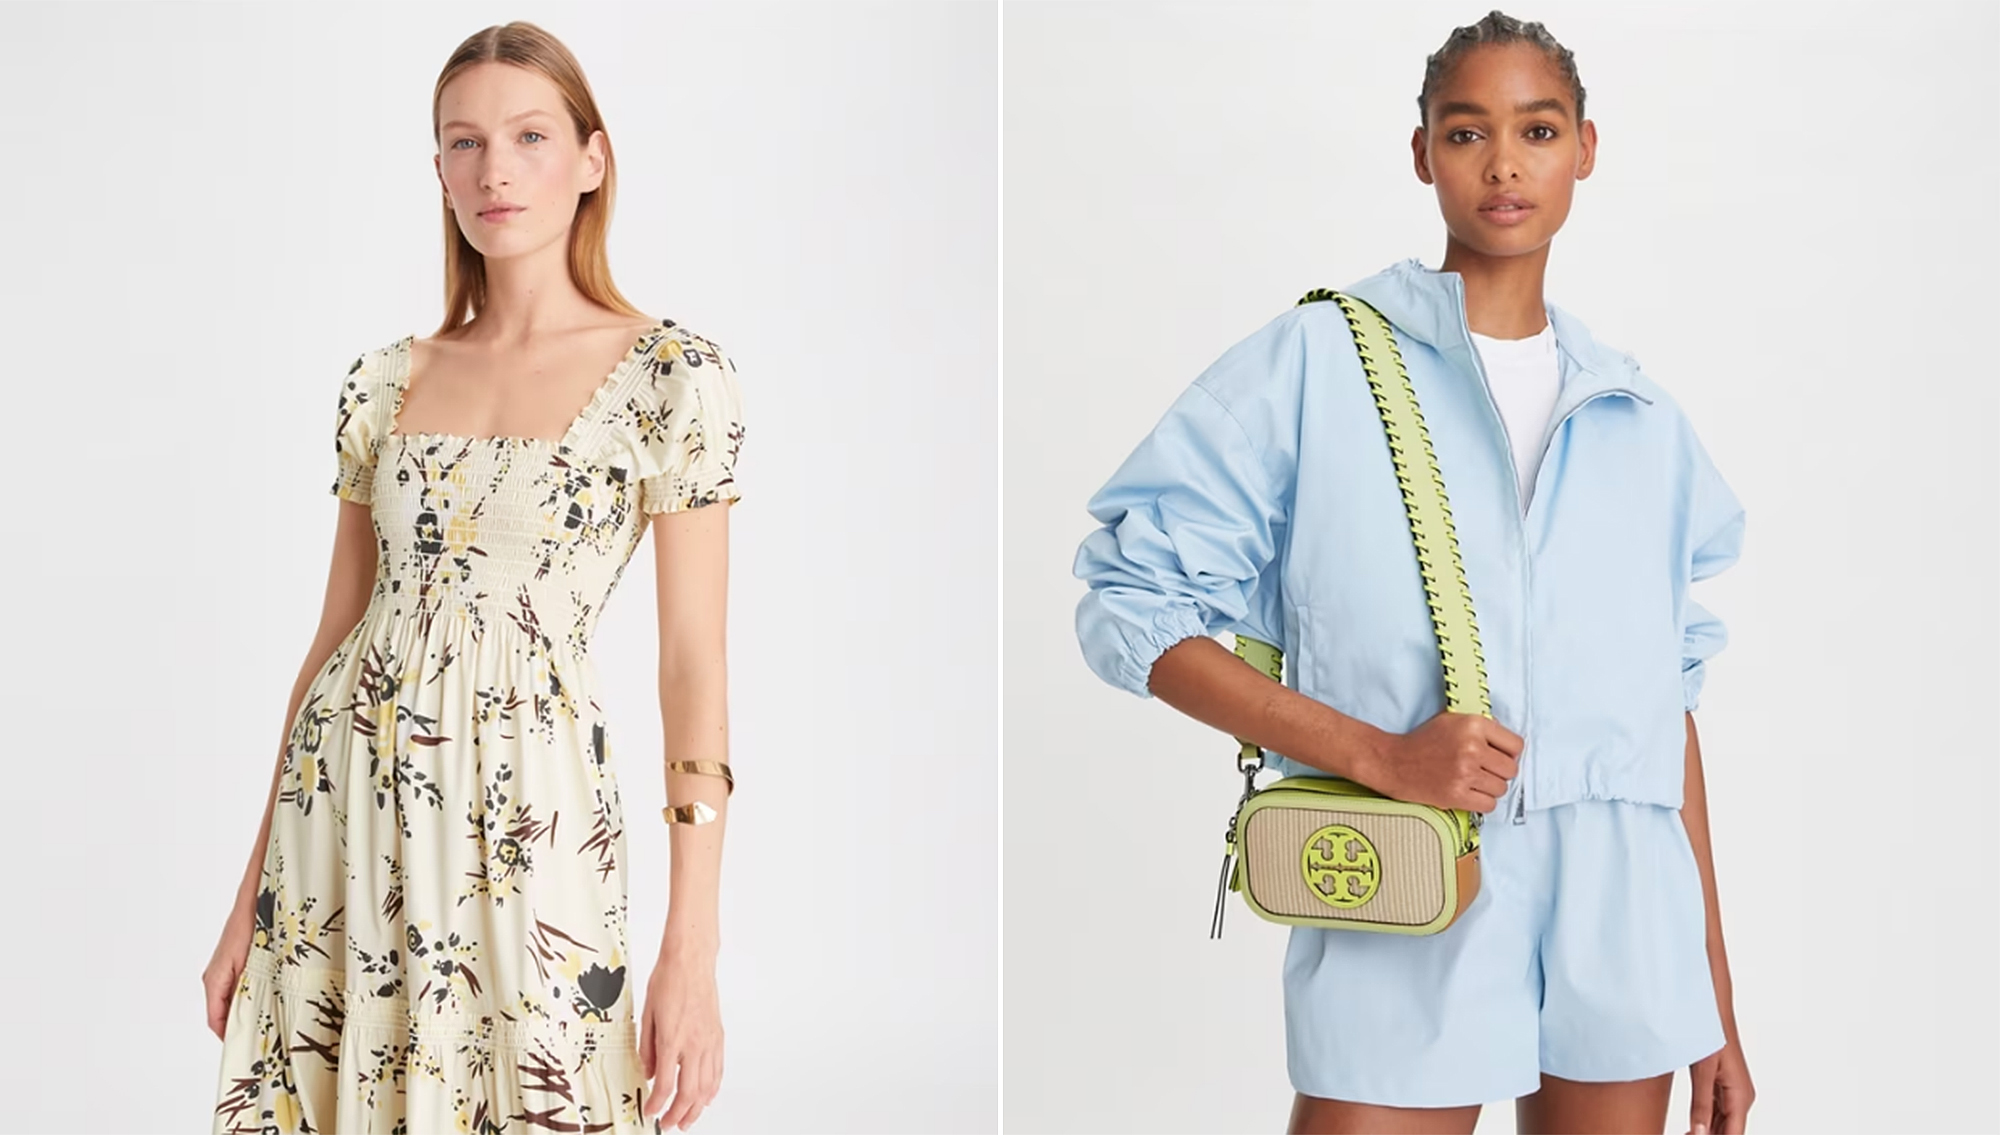 Tory Burch Private Sale Spring 2022: Best Bags to Buy